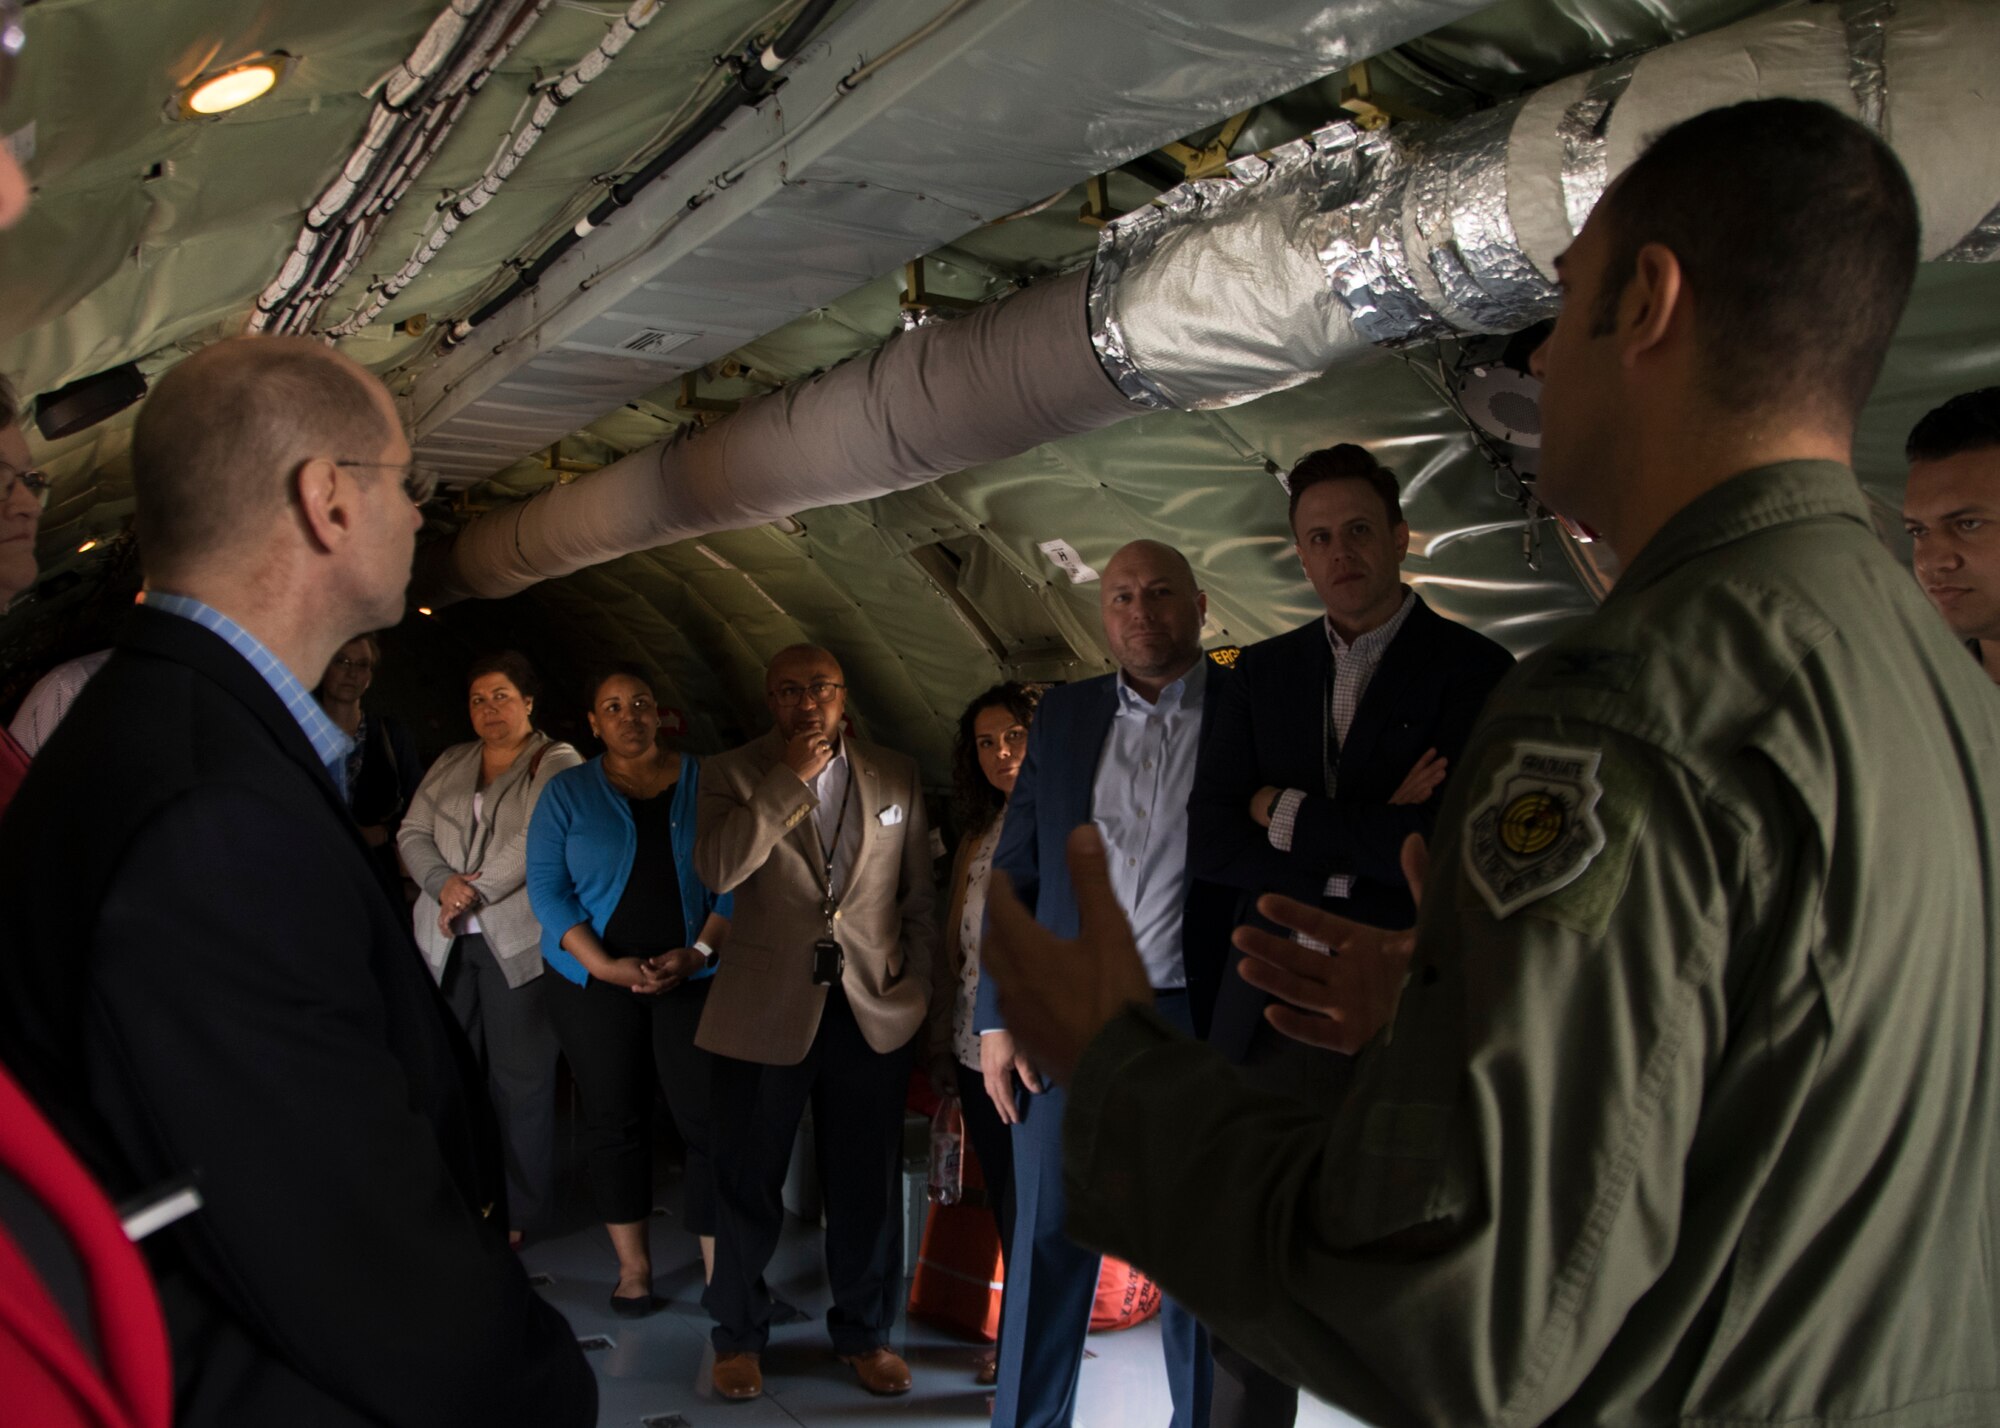 Col. Daniel Menashi, 459th Operations Group Commander, briefs members of Headquarters Air Force on the KC-135 Stratotanker during a visit, Oct. 7, 2019 on Joint Base Andrews, Md. The team was briefed on the KC-135 and given a tour of the aircraft. (U.S. Air Force photo by Staff Sgt. Cierra Presentado/Released)